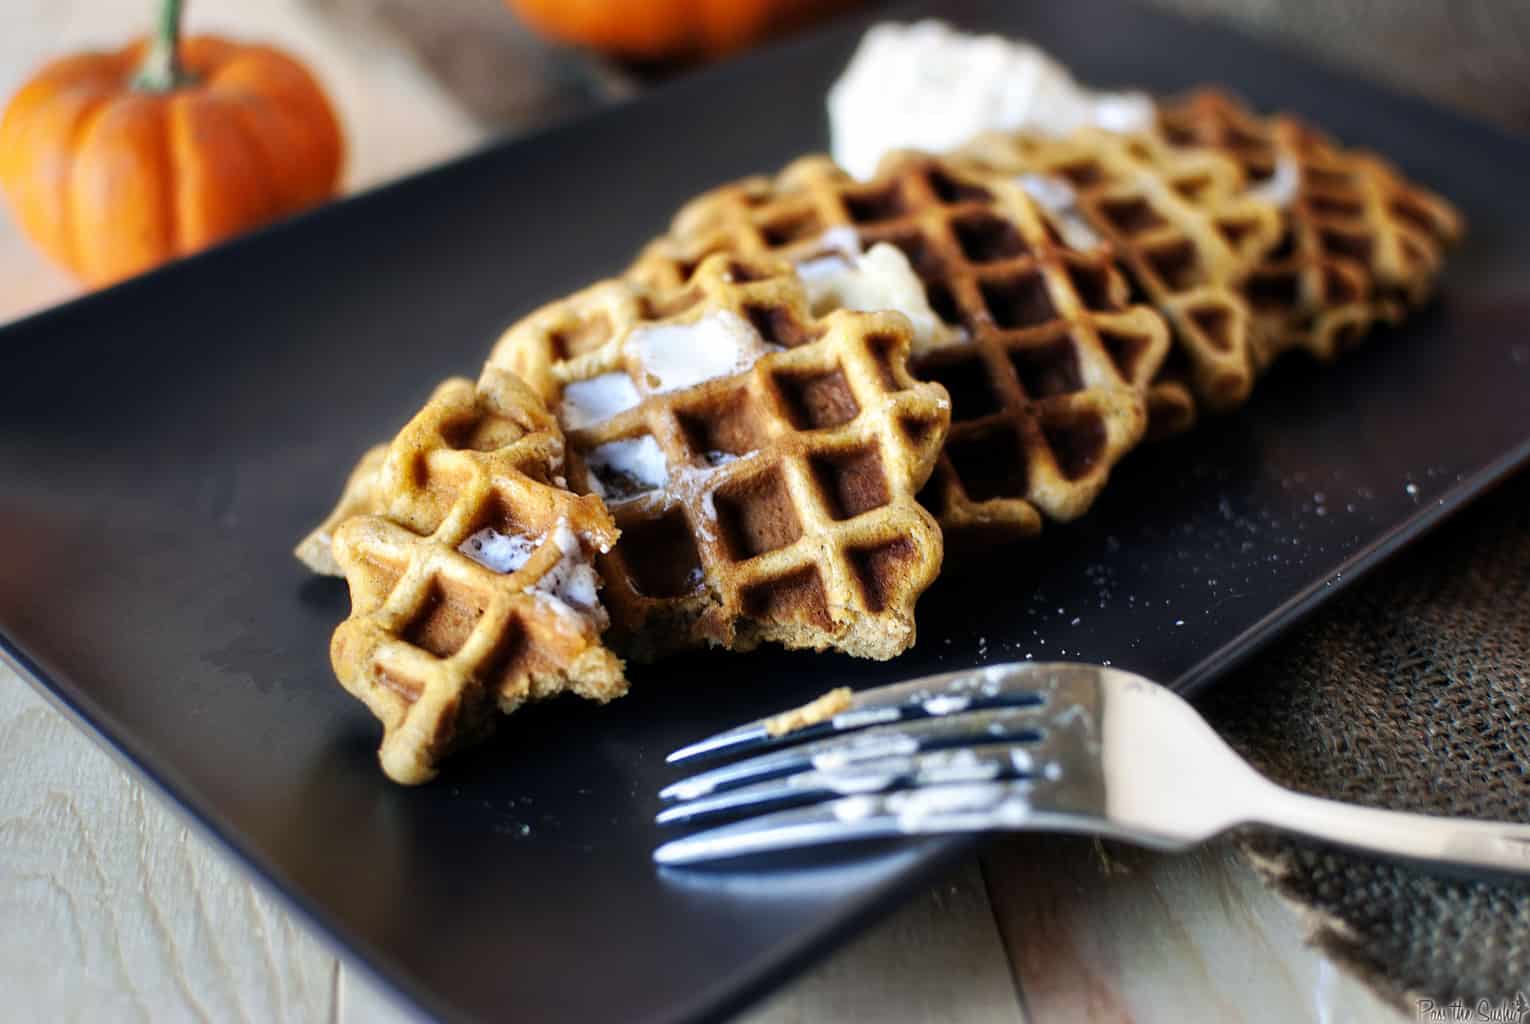 Pumpkin pie waffles ﻿are the perfect weekend breakfast. With pumpkin, cinnamon, ginger and clove, these waffles are a taste of fall!